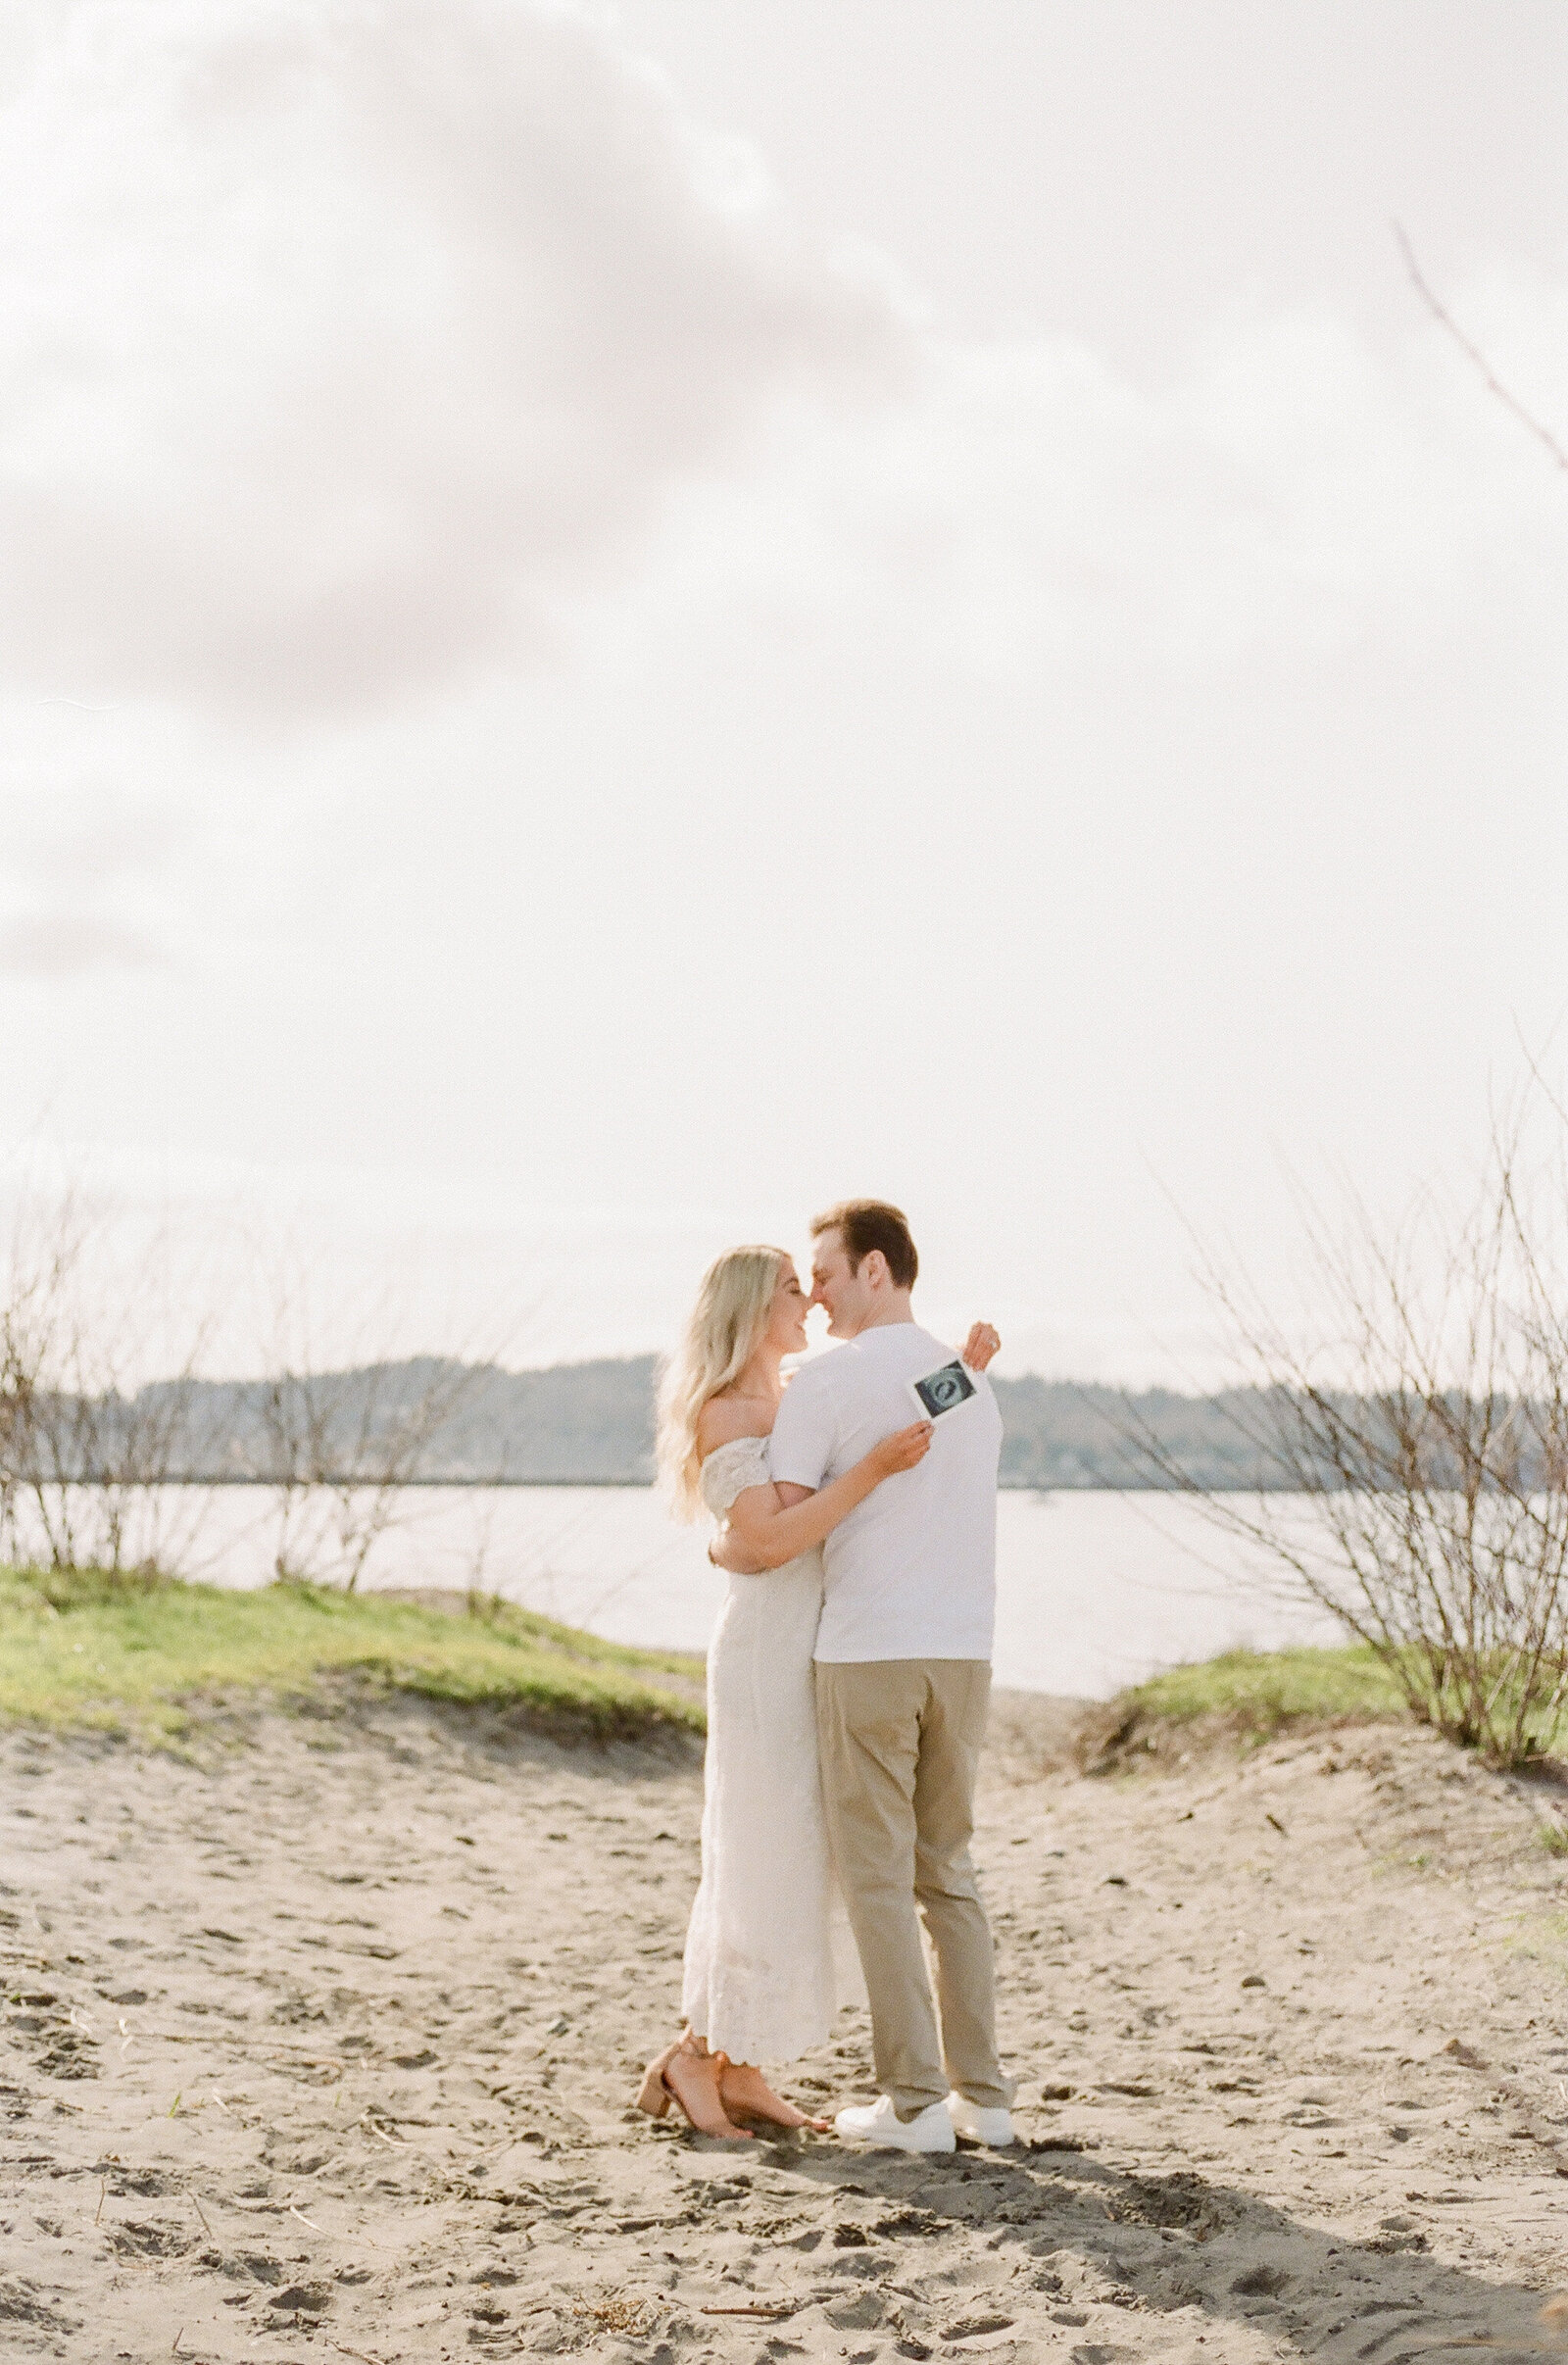 Brittany and Steven - Golden Gardens Park - Kerry Jeanne Photography (36 of 200)